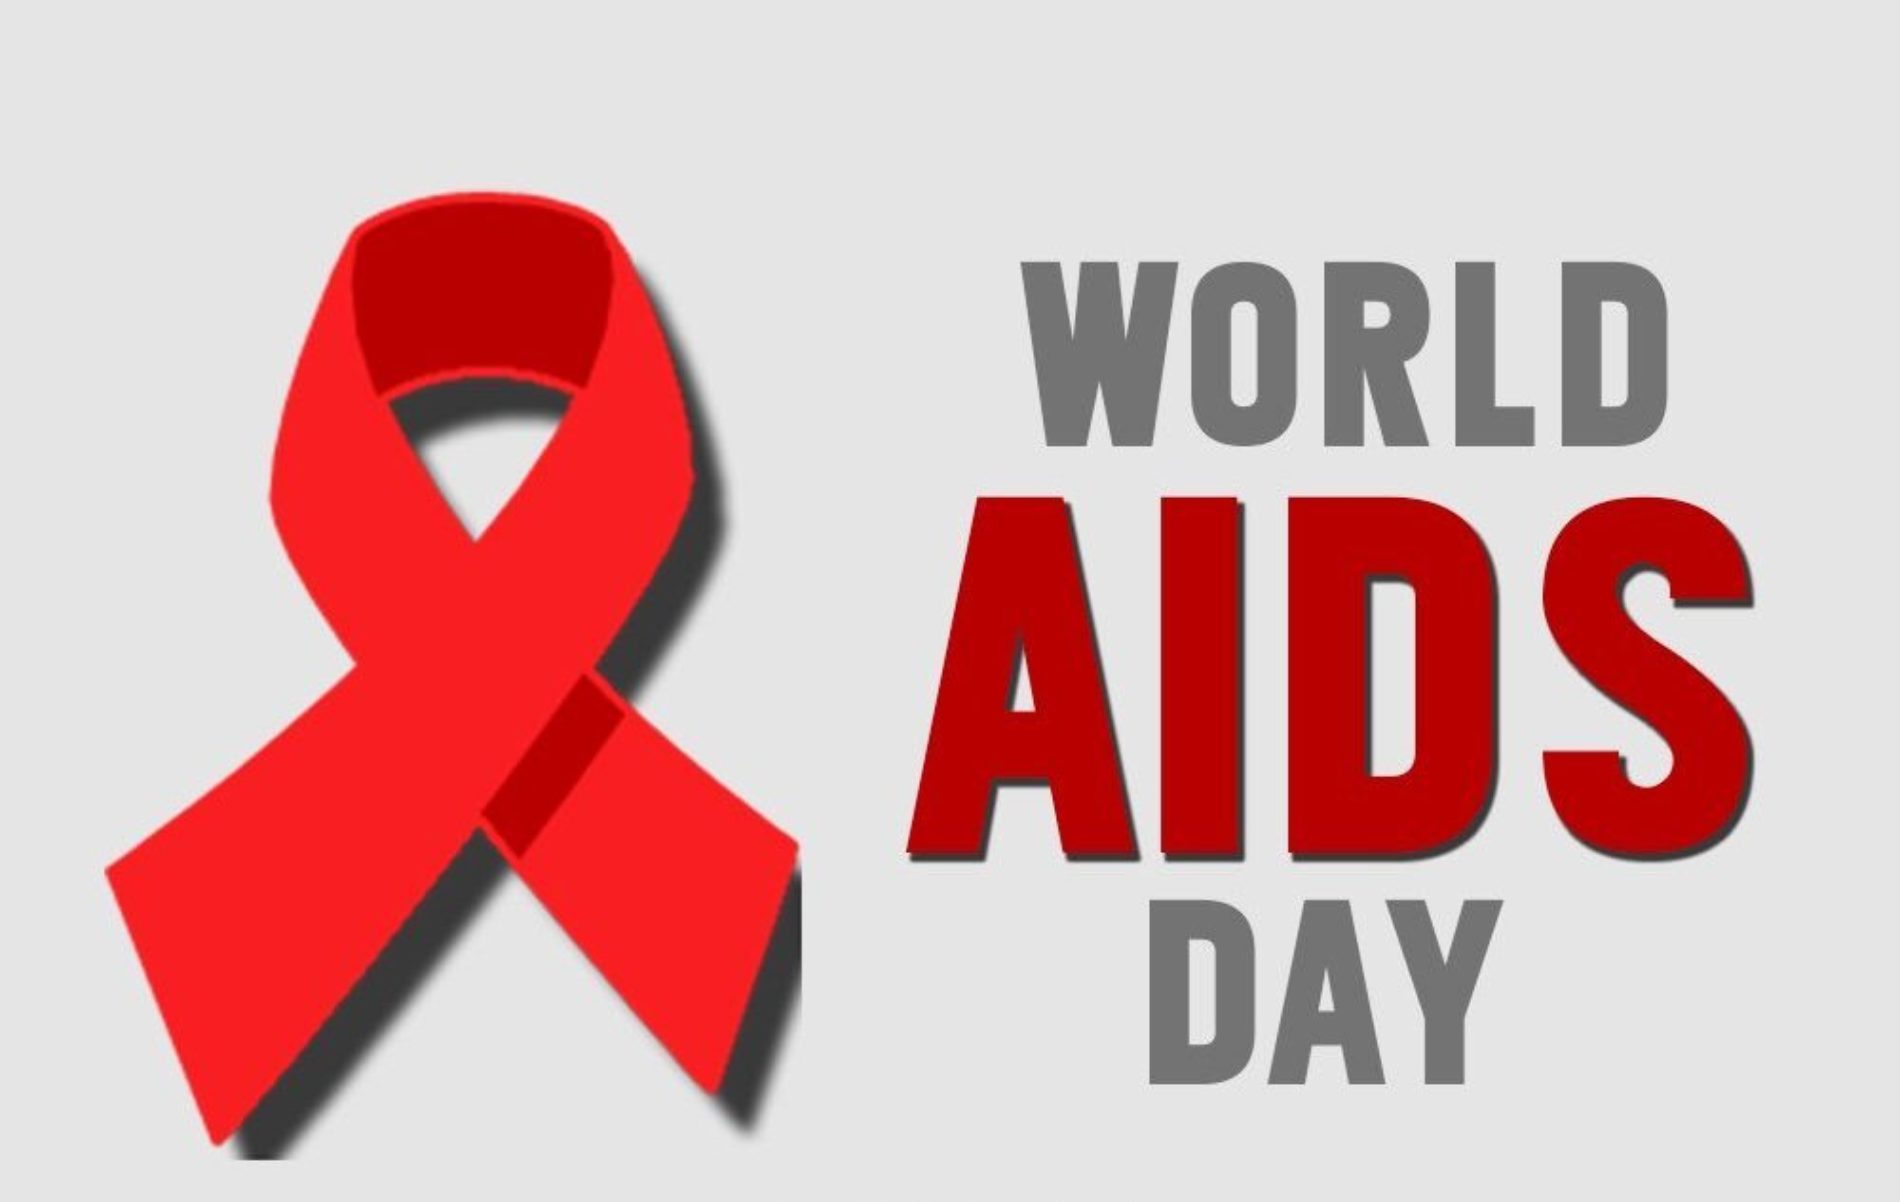 Happy World AIDS Day, Everyone!